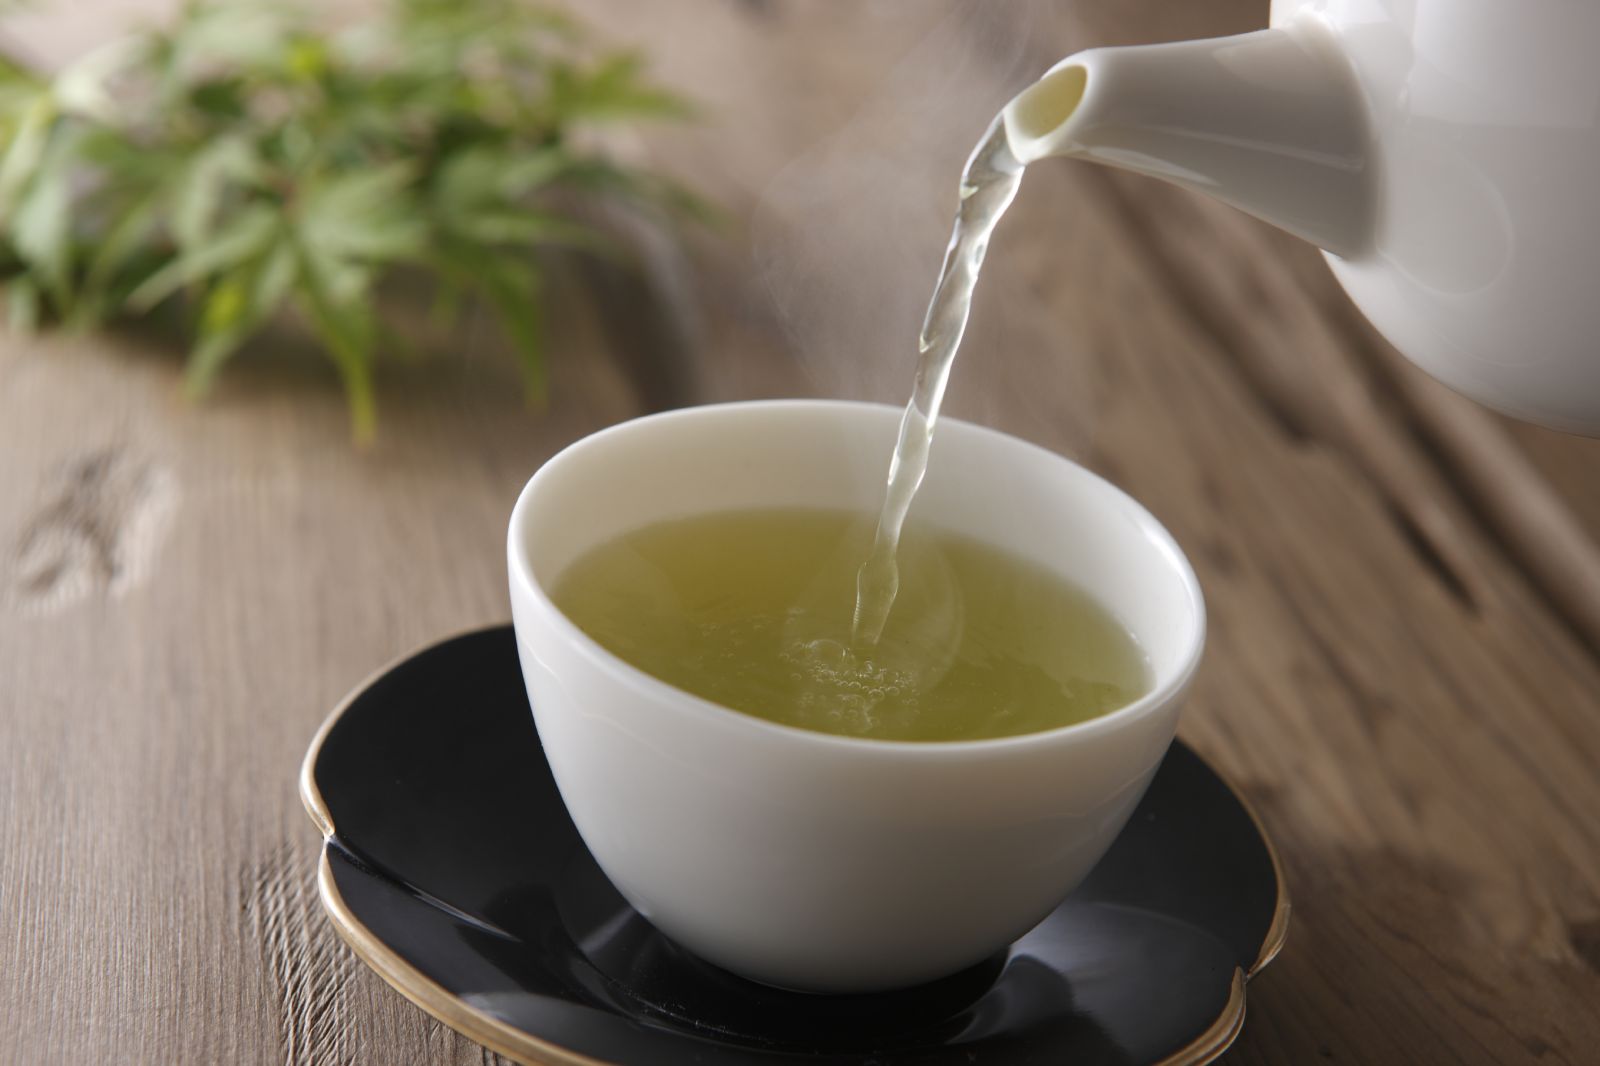  Green Tea compound can protect Brain and Heart .True or False ?  